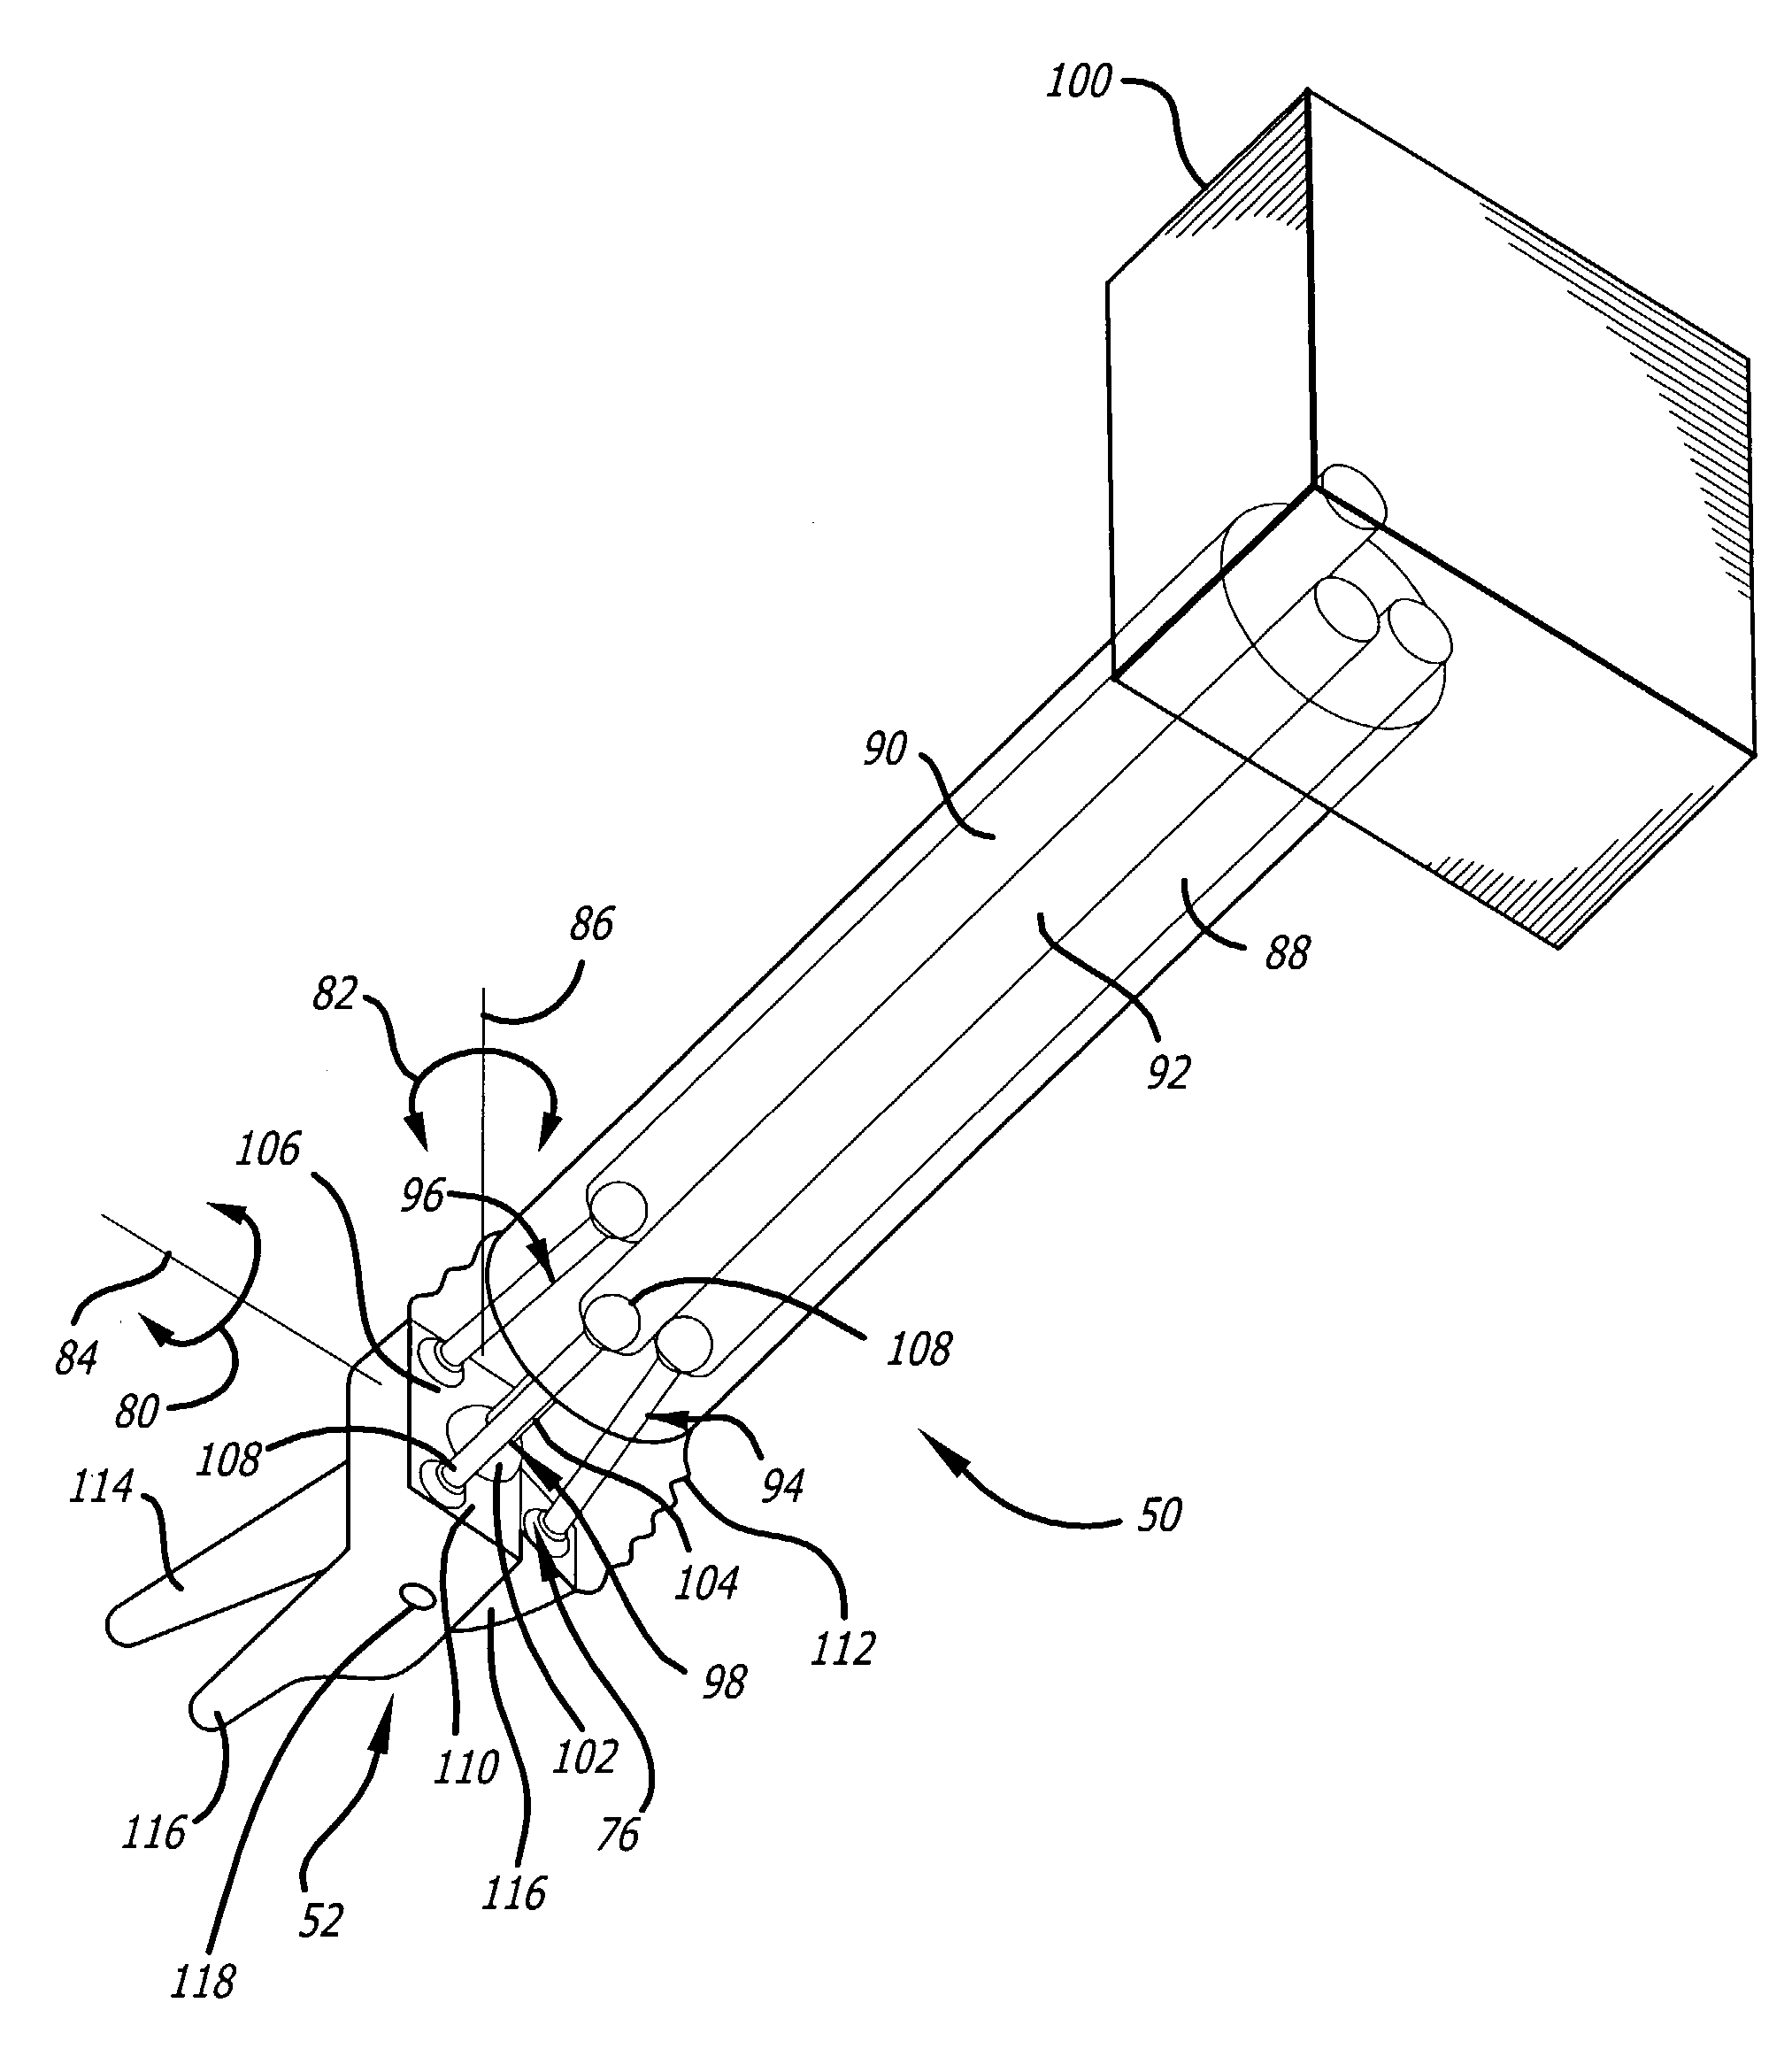 Surgical instrument with a universal wrist